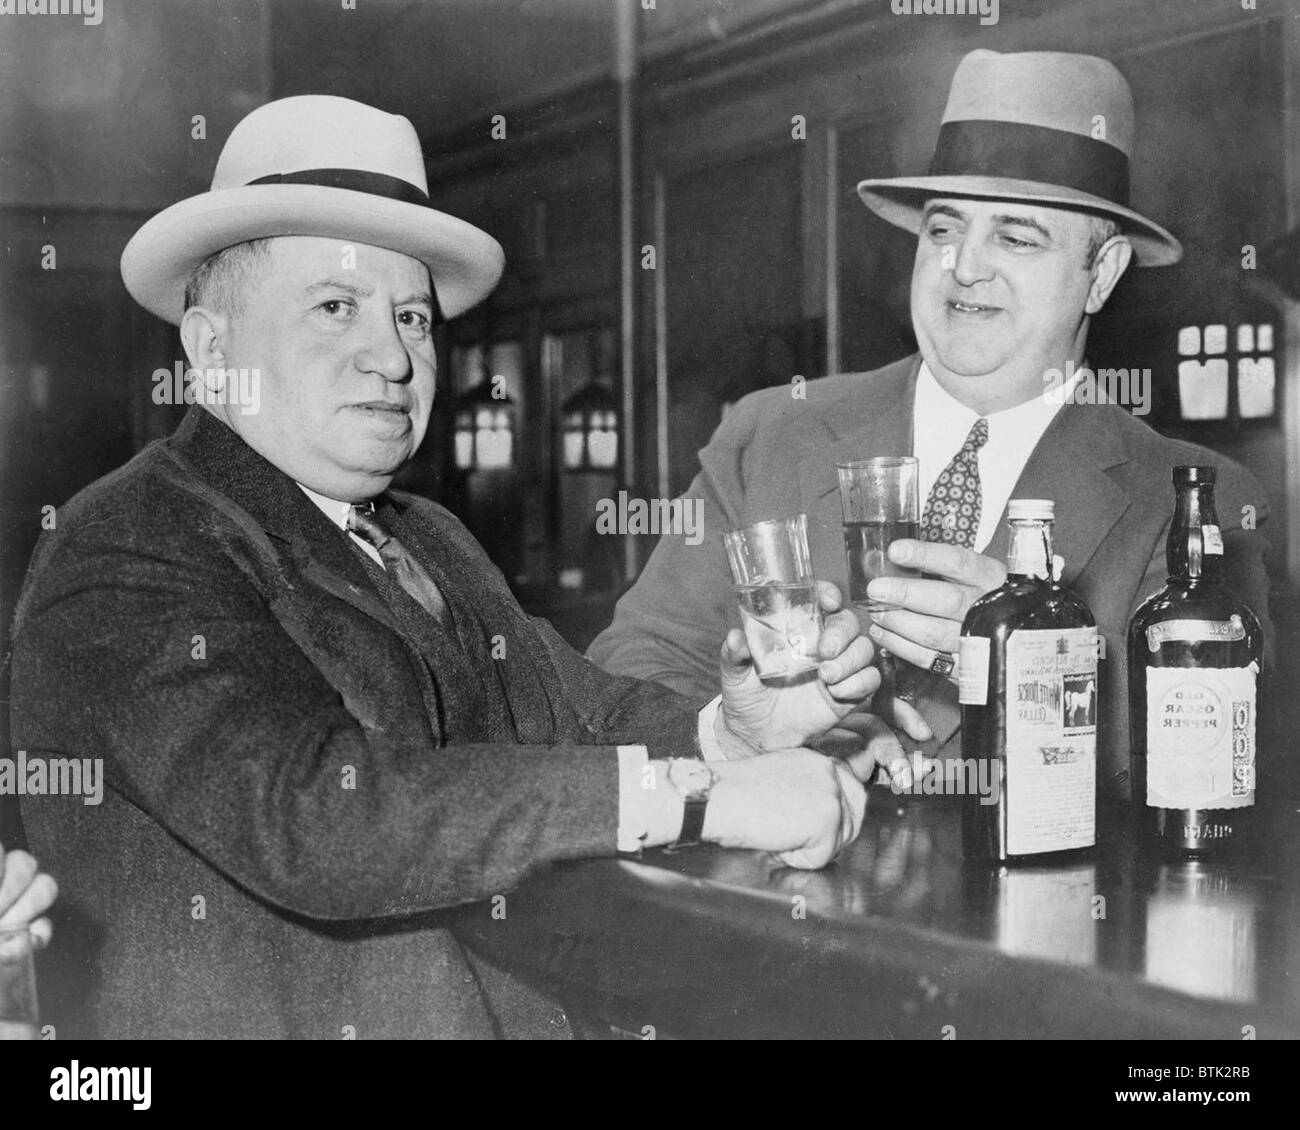 Izzy Einstein (left) sharing a toast with his partner, Moe Smith in a New York bar in 1935. In the 1920's, Izzy and Moe were the most effective team of prohibition agents, using disguises to arrest bootleggers, close speakeasies, and confiscate liquor. Stock Photo